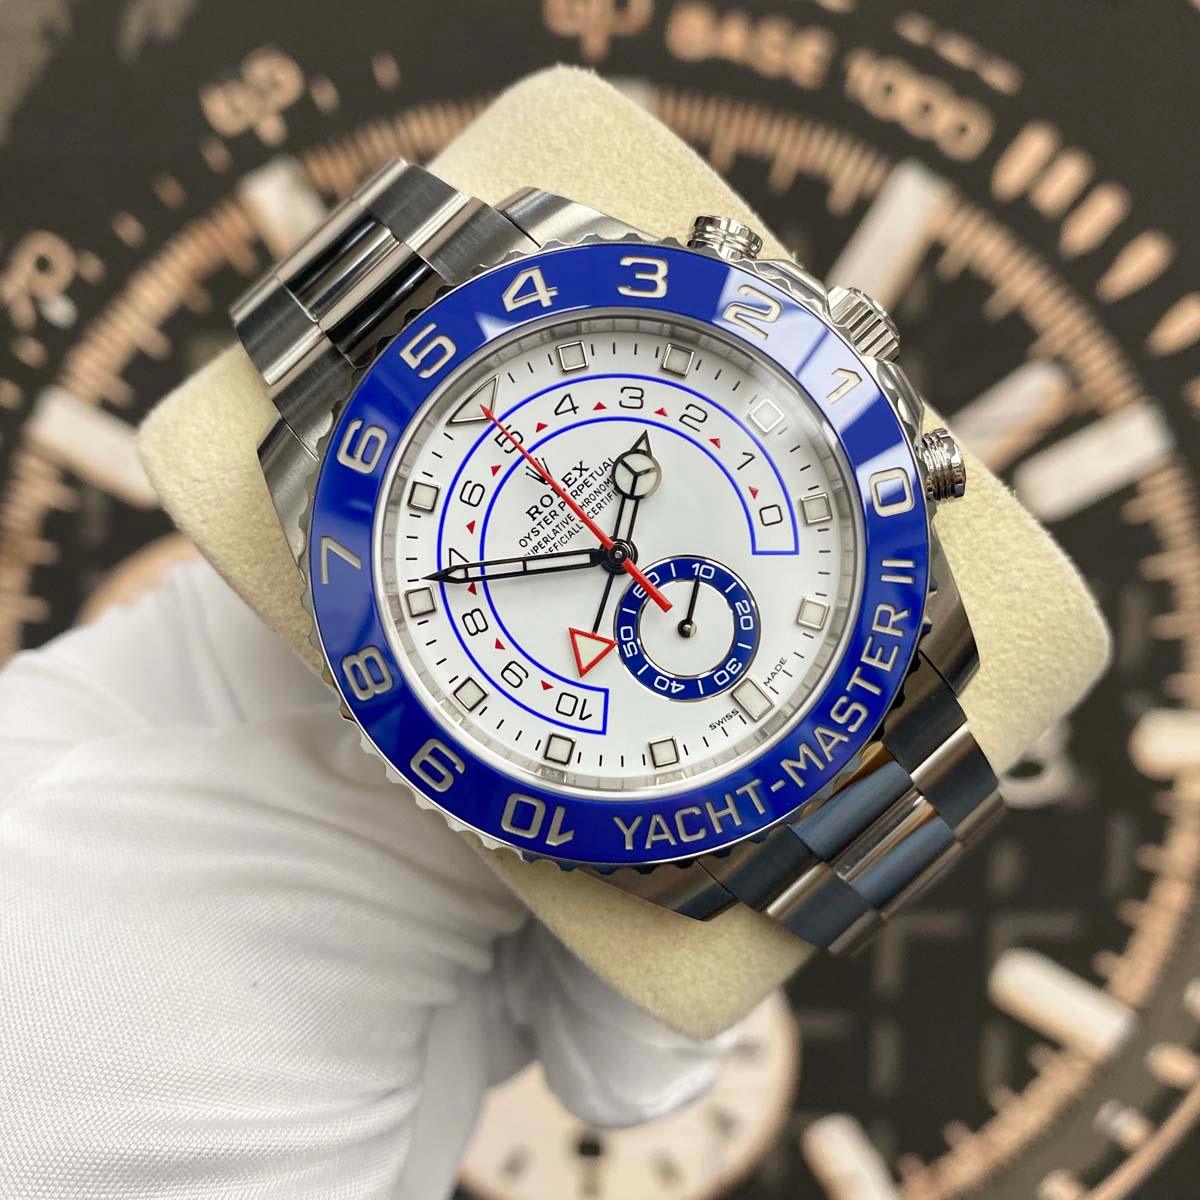 Rolex Yacht-Master II Newer Style Mercedes Hands 44mm 116680 White Dial Pre-Owned - Gotham Trading 